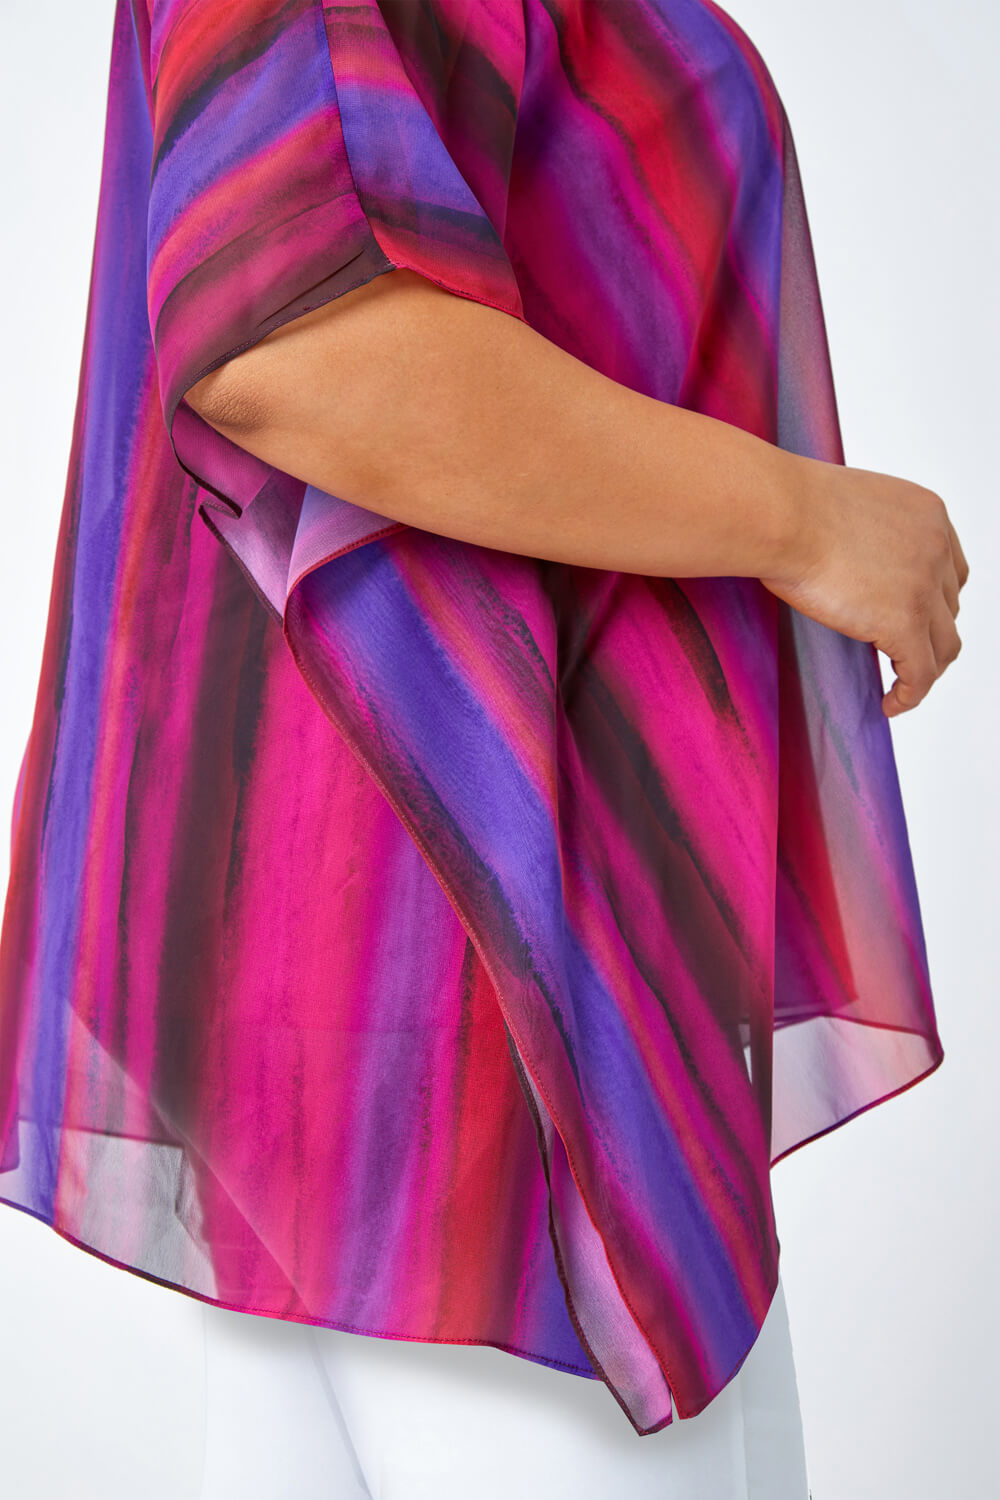 PINK Curve Stripe Chiffon Overlay Top, Image 5 of 5